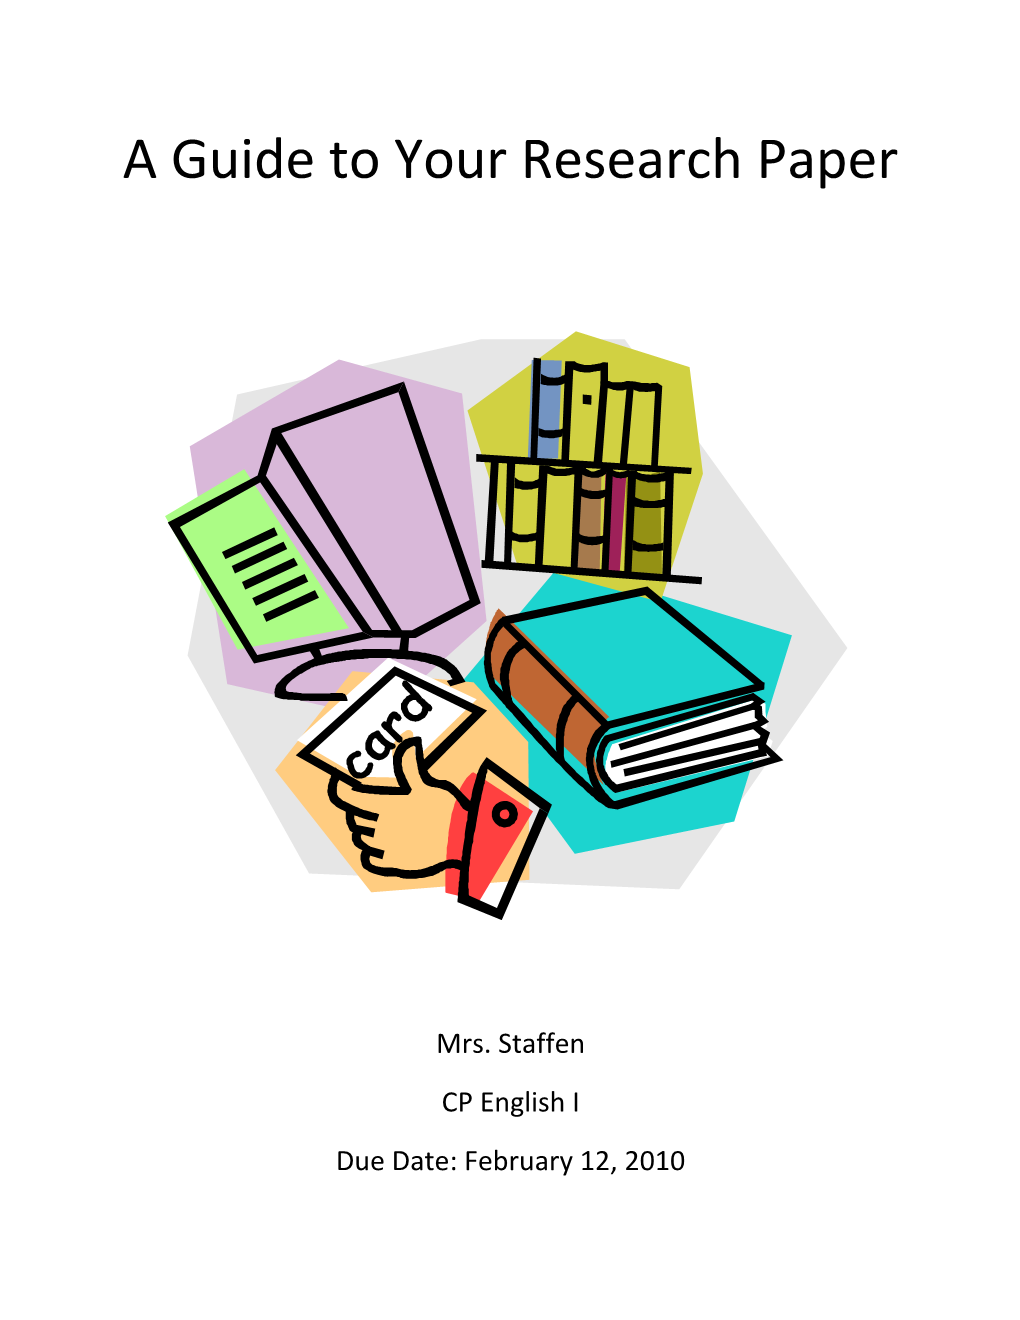 A Guide to Your Research Paper